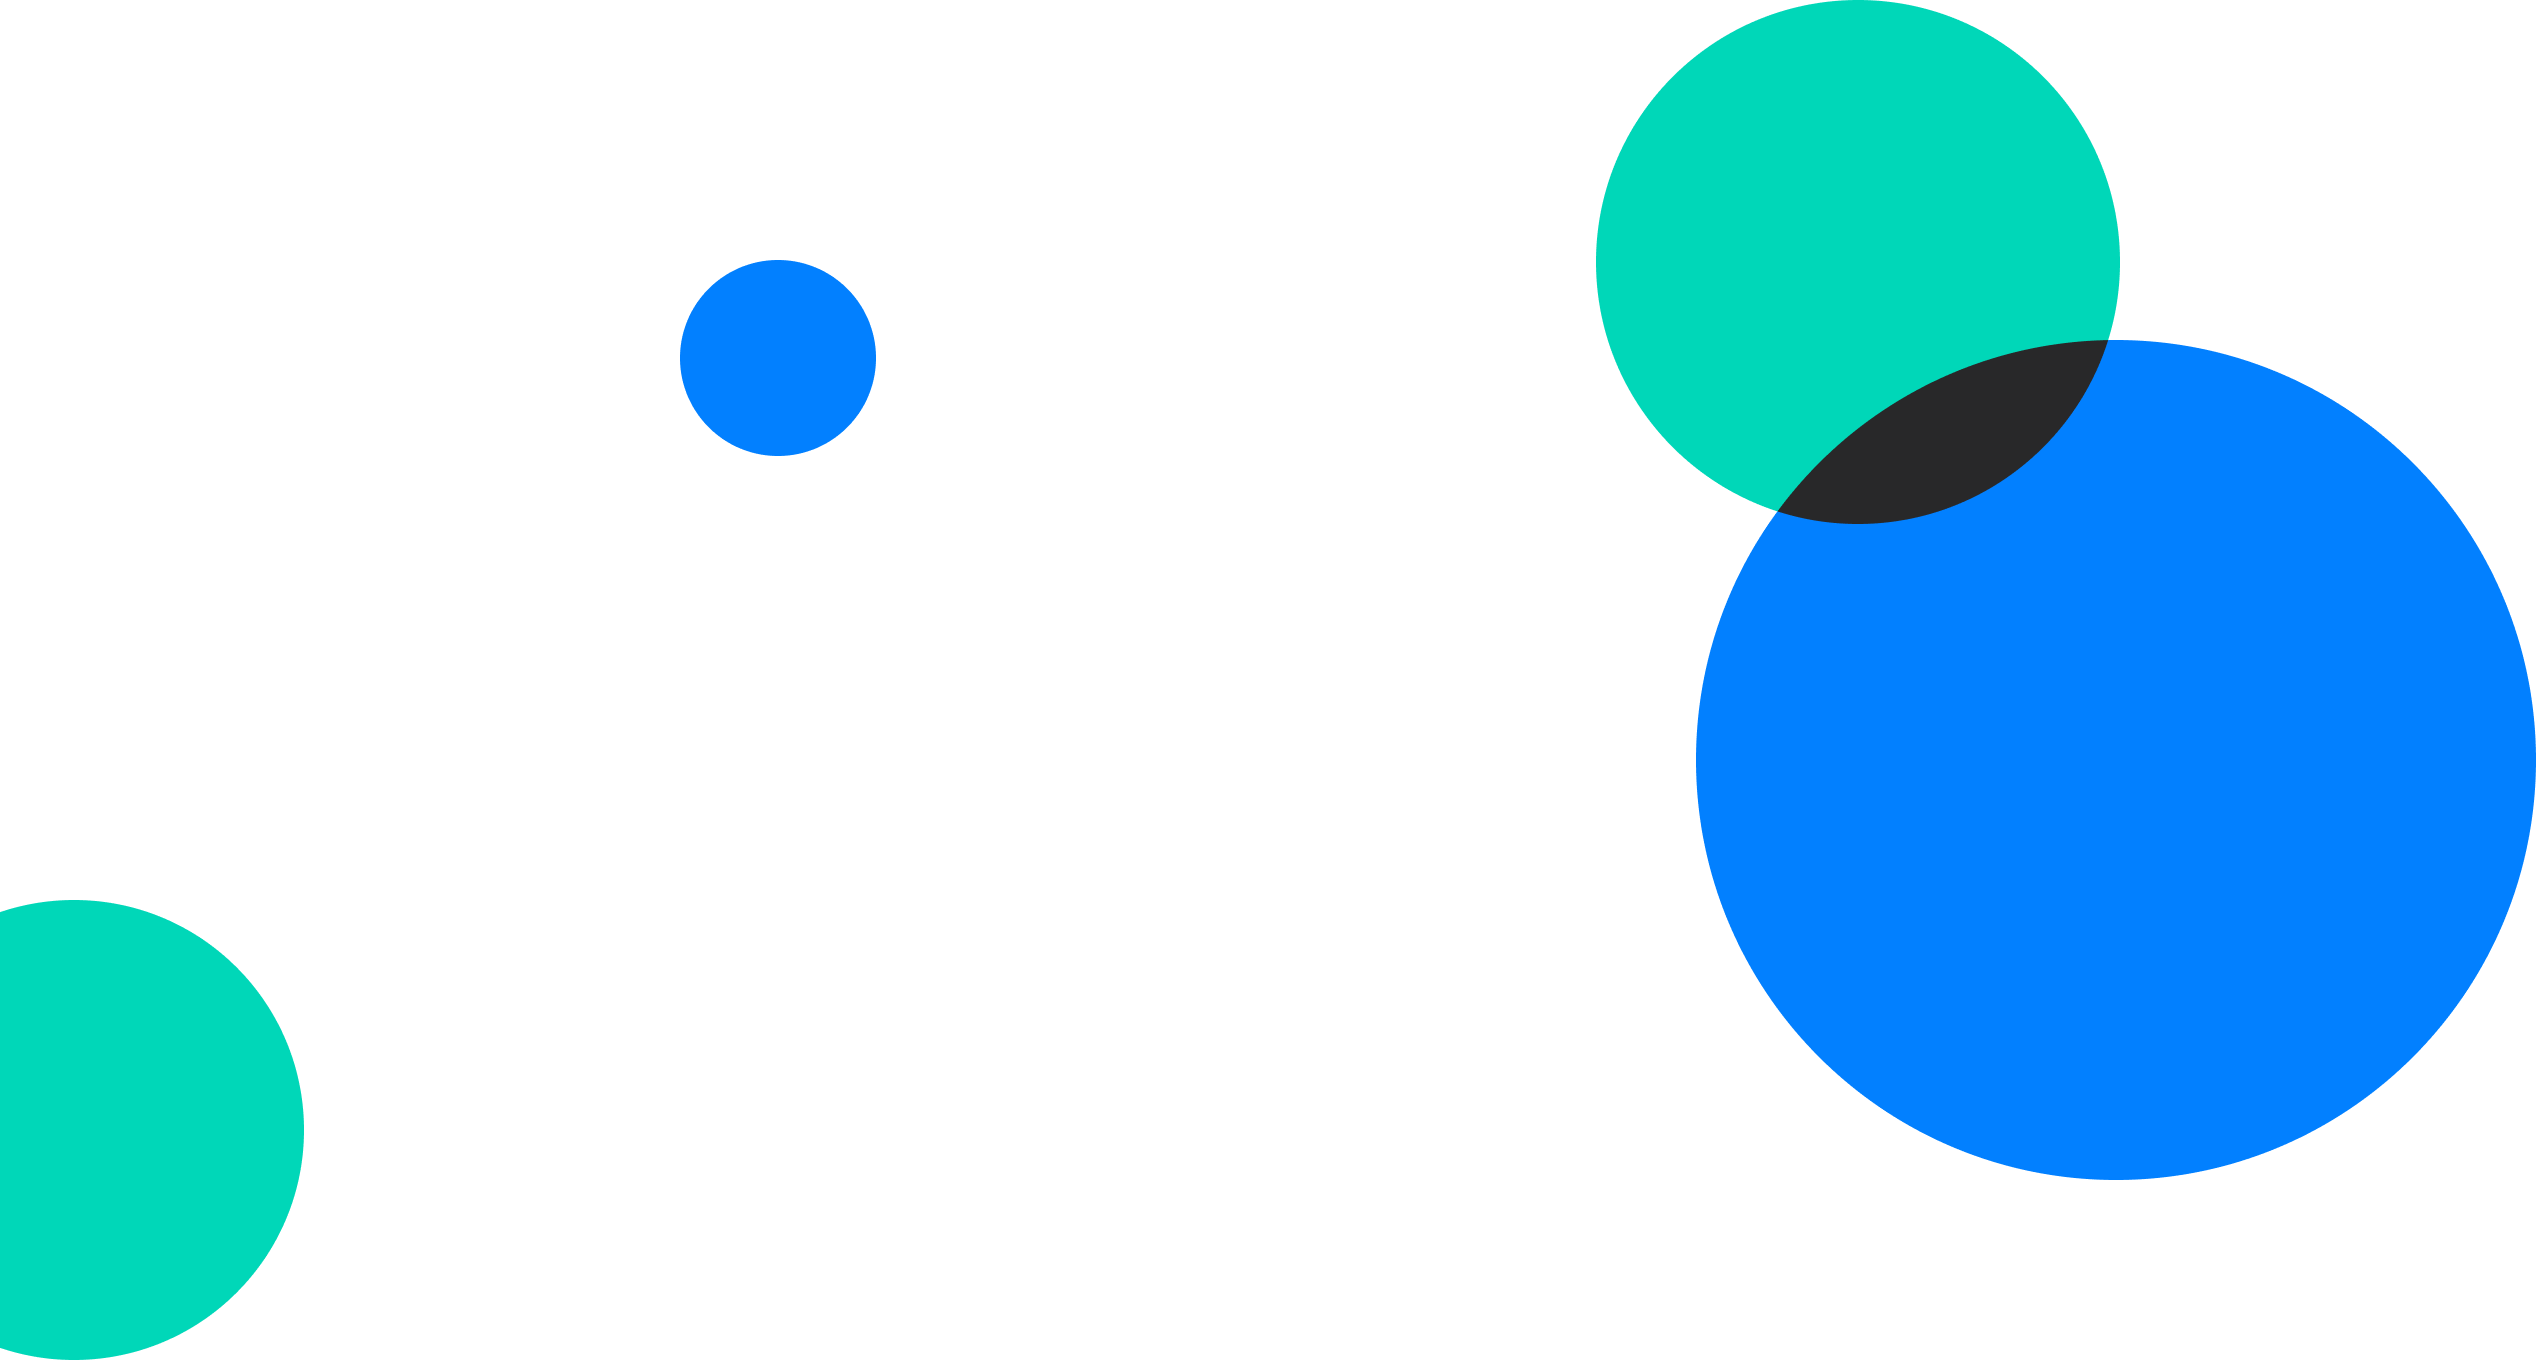 Blue and green circles of various sizes